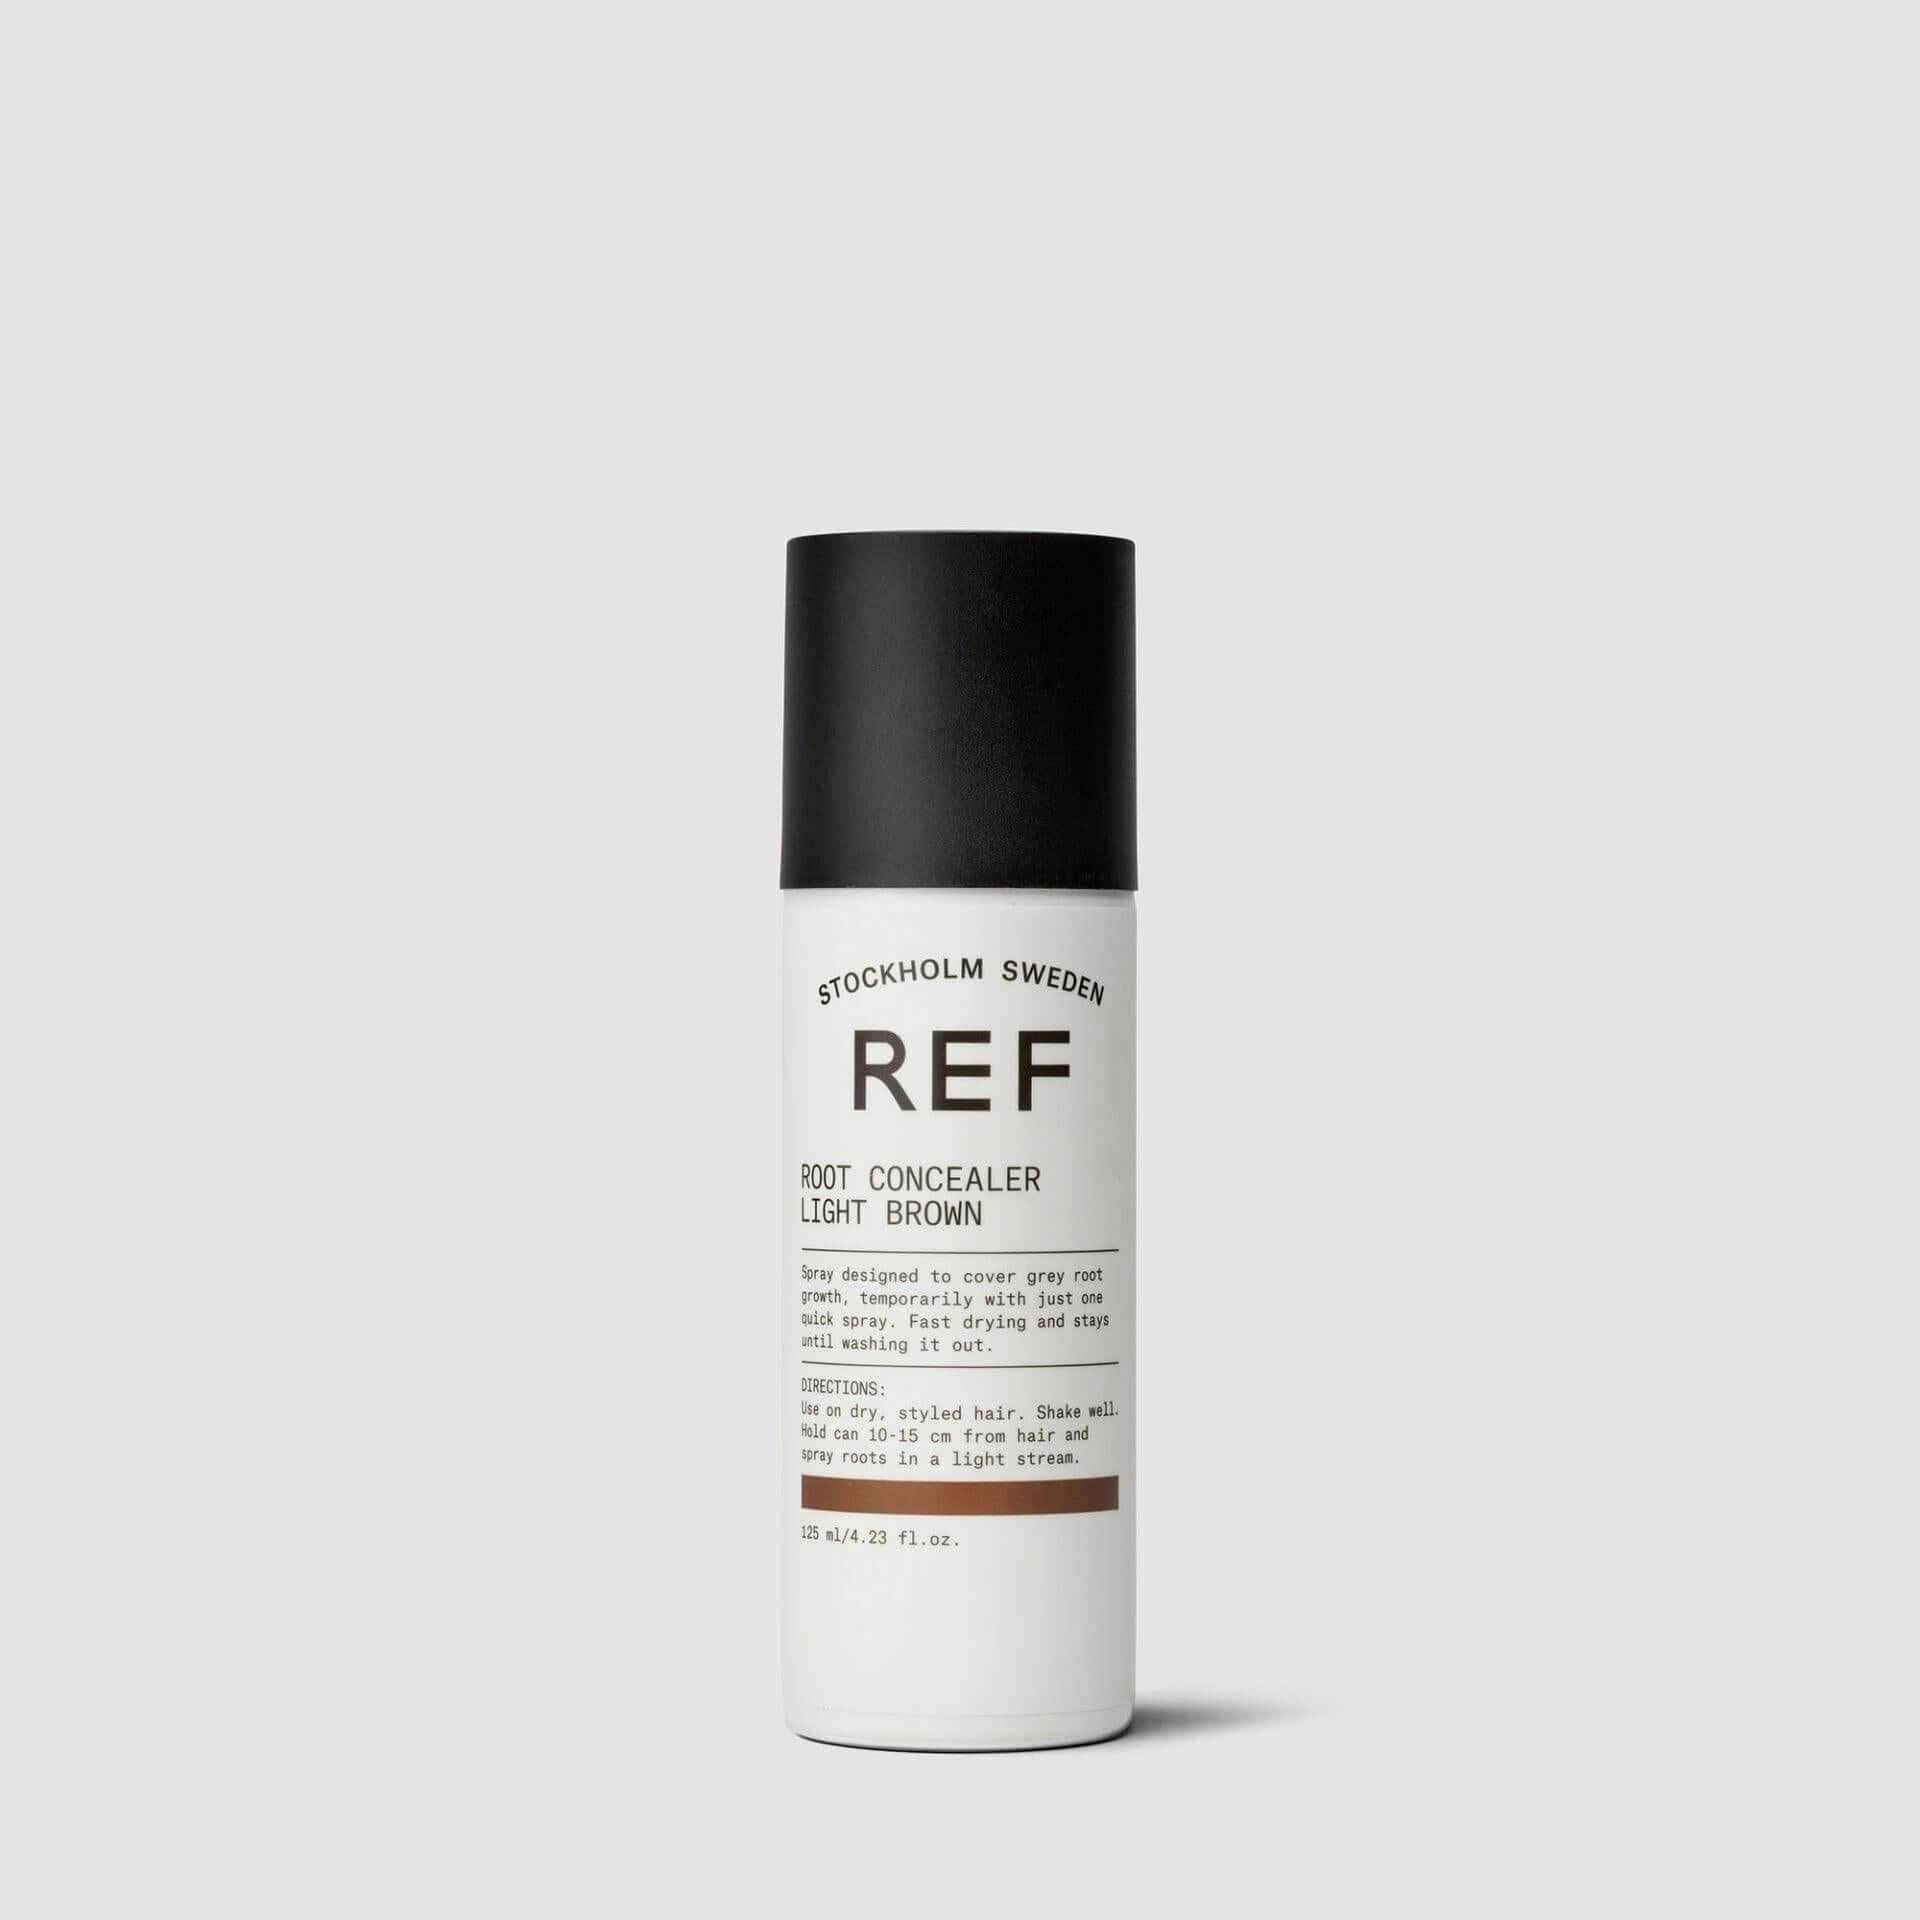 REF STOCKHOLM SWEDEN Root Concealer a Hair Styling Products from Simply Colour Hair Salon Studio & Online Store